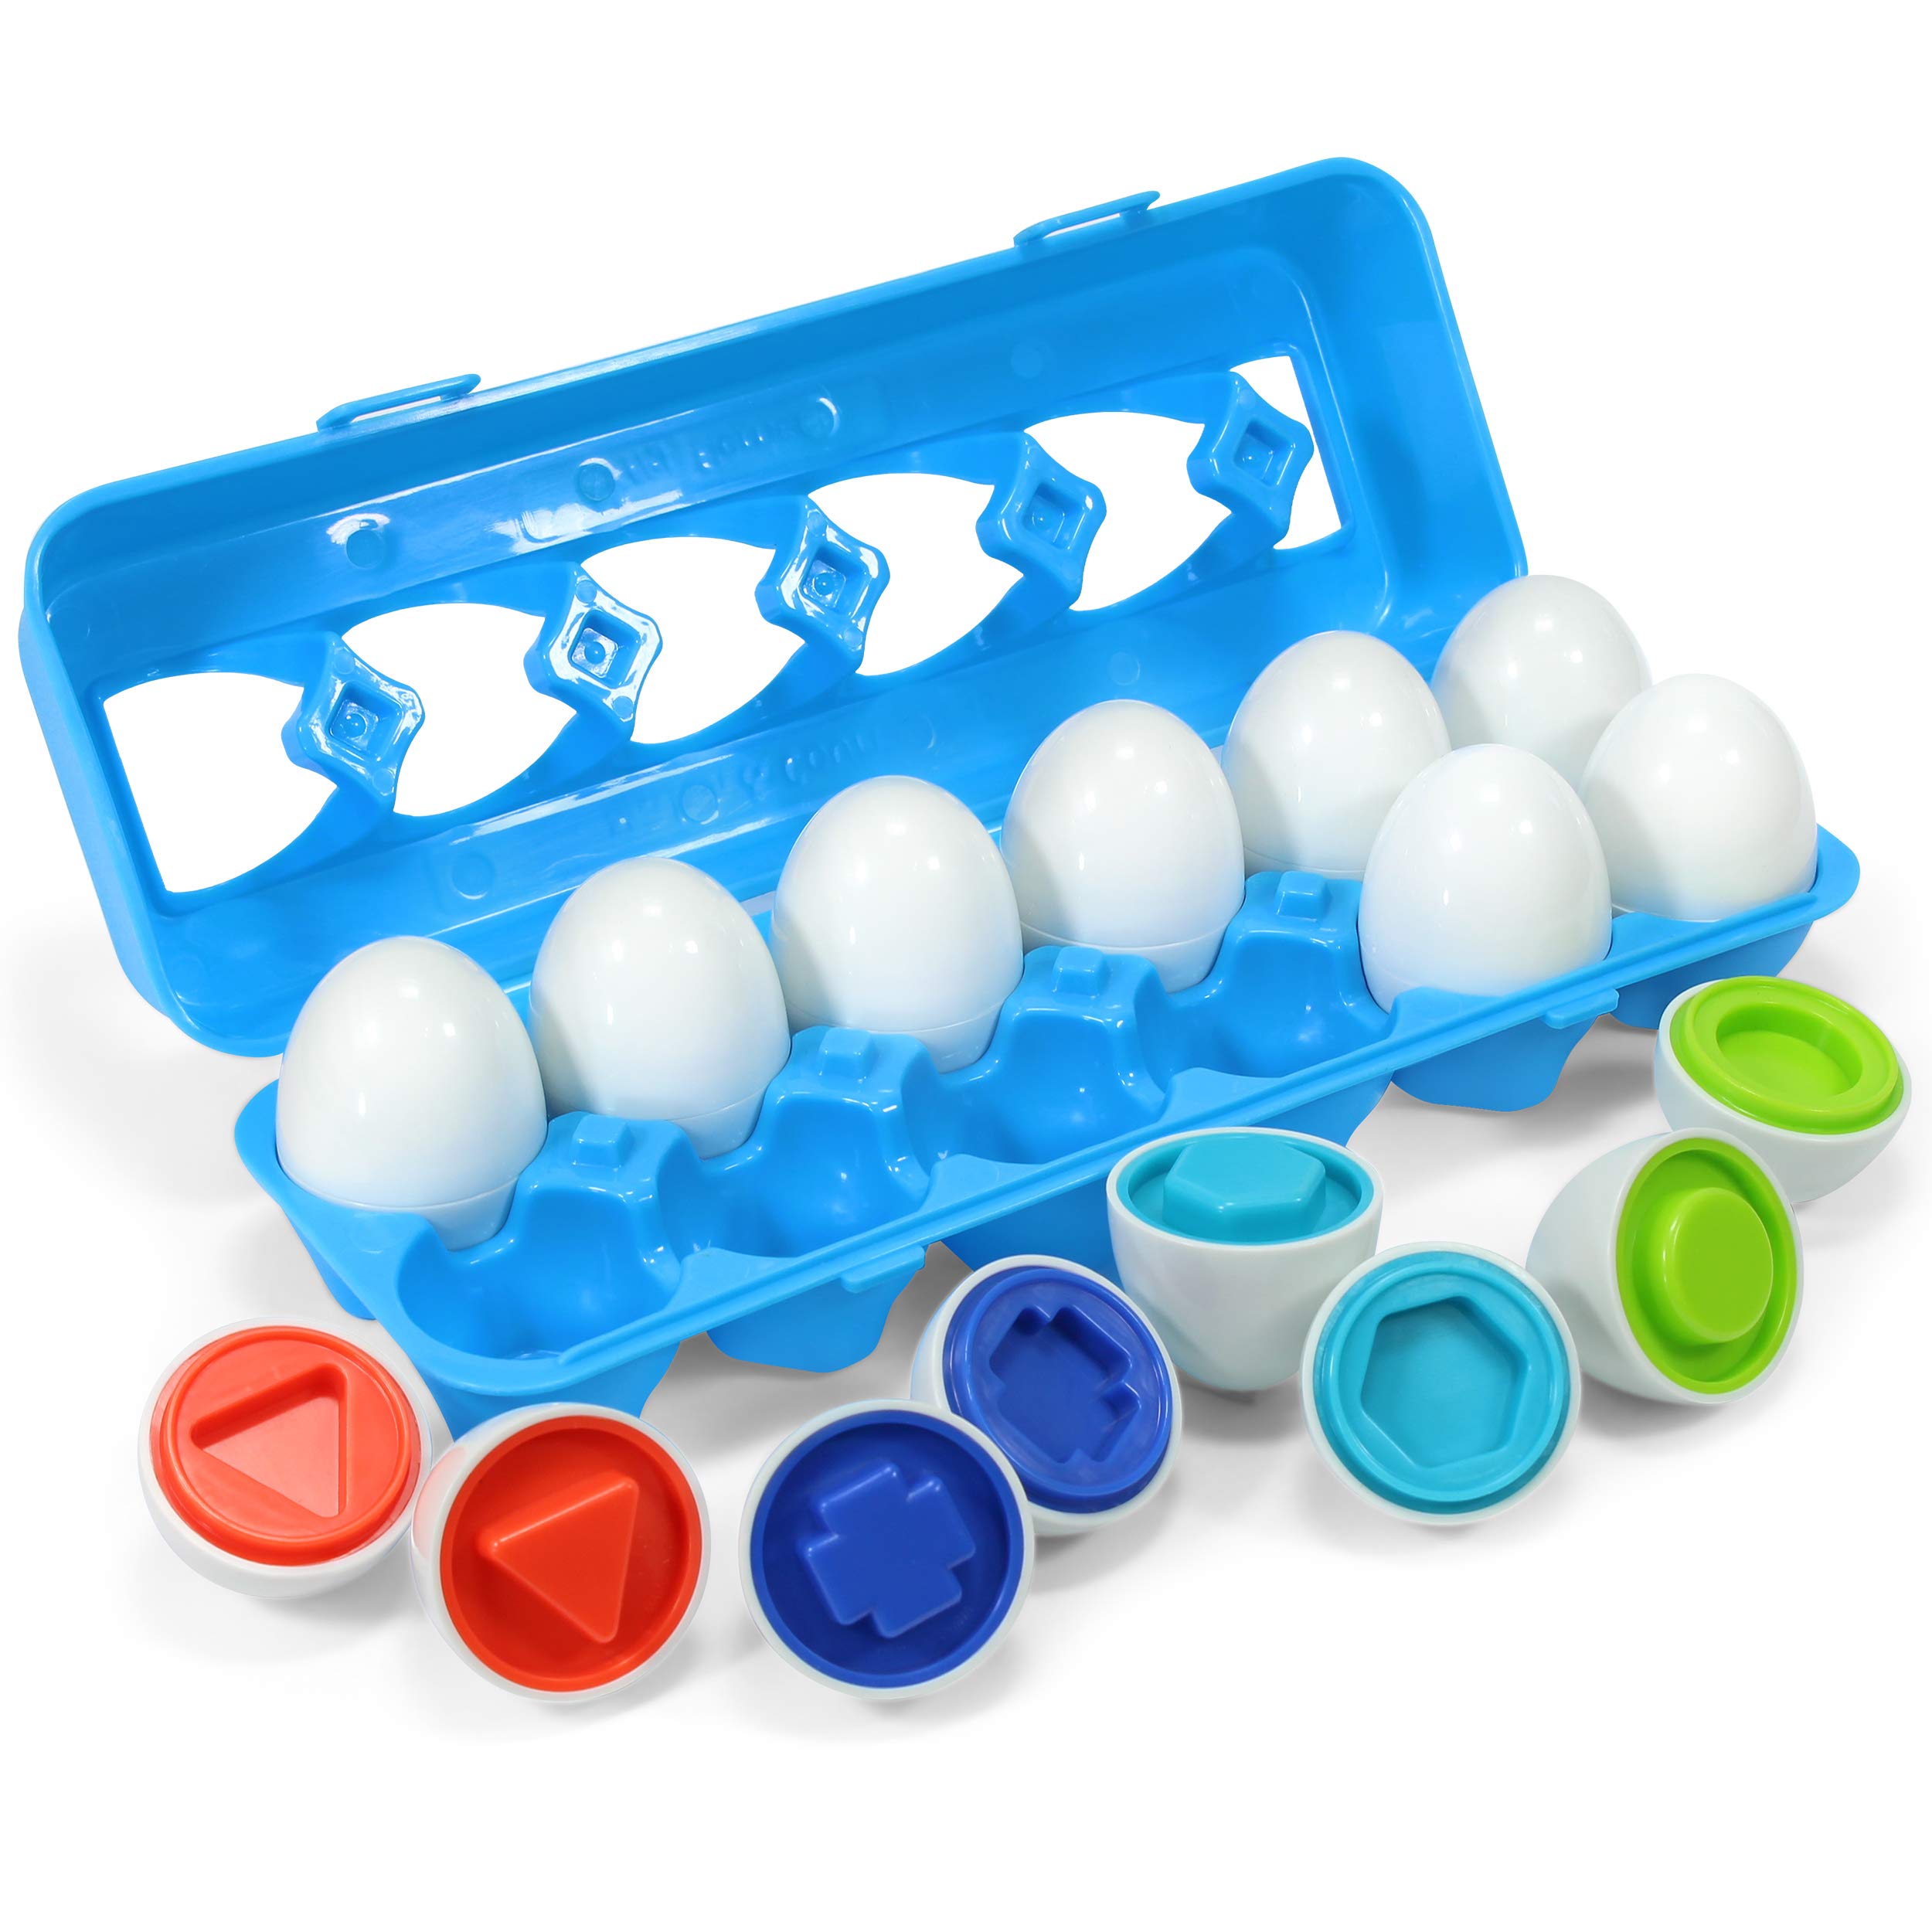 "Kidzlane Sorting & Matching Educational Egg Toy – Teach Colors, Shapes & Fine Motor Skills - 12 Sturdy Eggs in Plastic Carton – 100% Toddler & Child Safe 18M+" - image 1 of 6